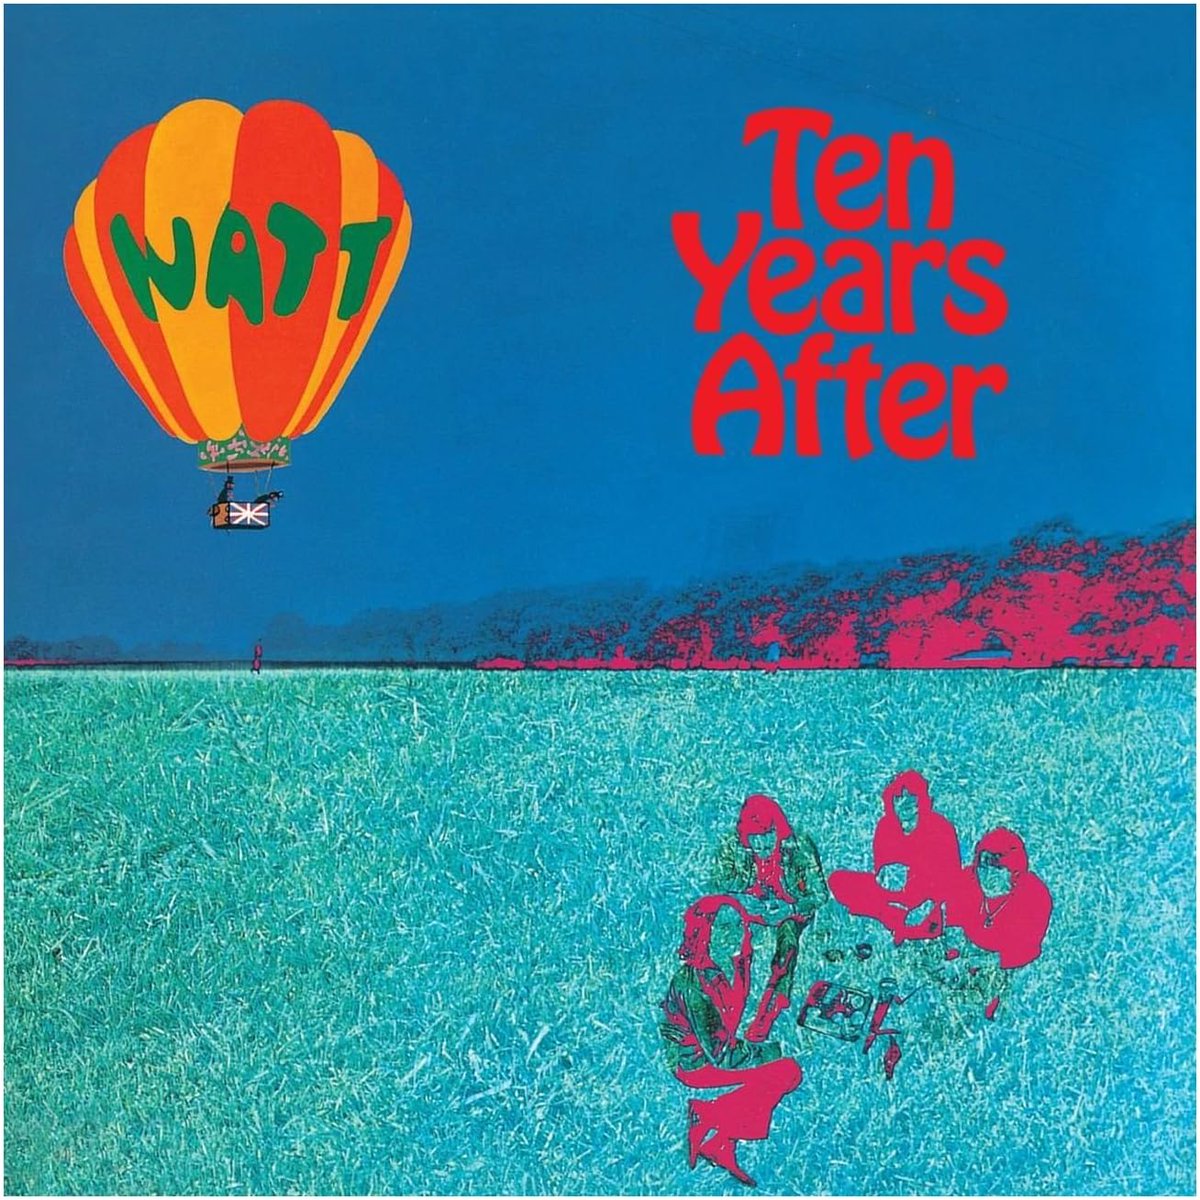 Ten Years After - Watt,  1971  

It was recorded in September 1970 except for the last track, a cover of Chuck Berry's 'Sweet Little Sixteen', which is a recording from the 1970 Isle of Wight Festival.

#TenYearsAfter